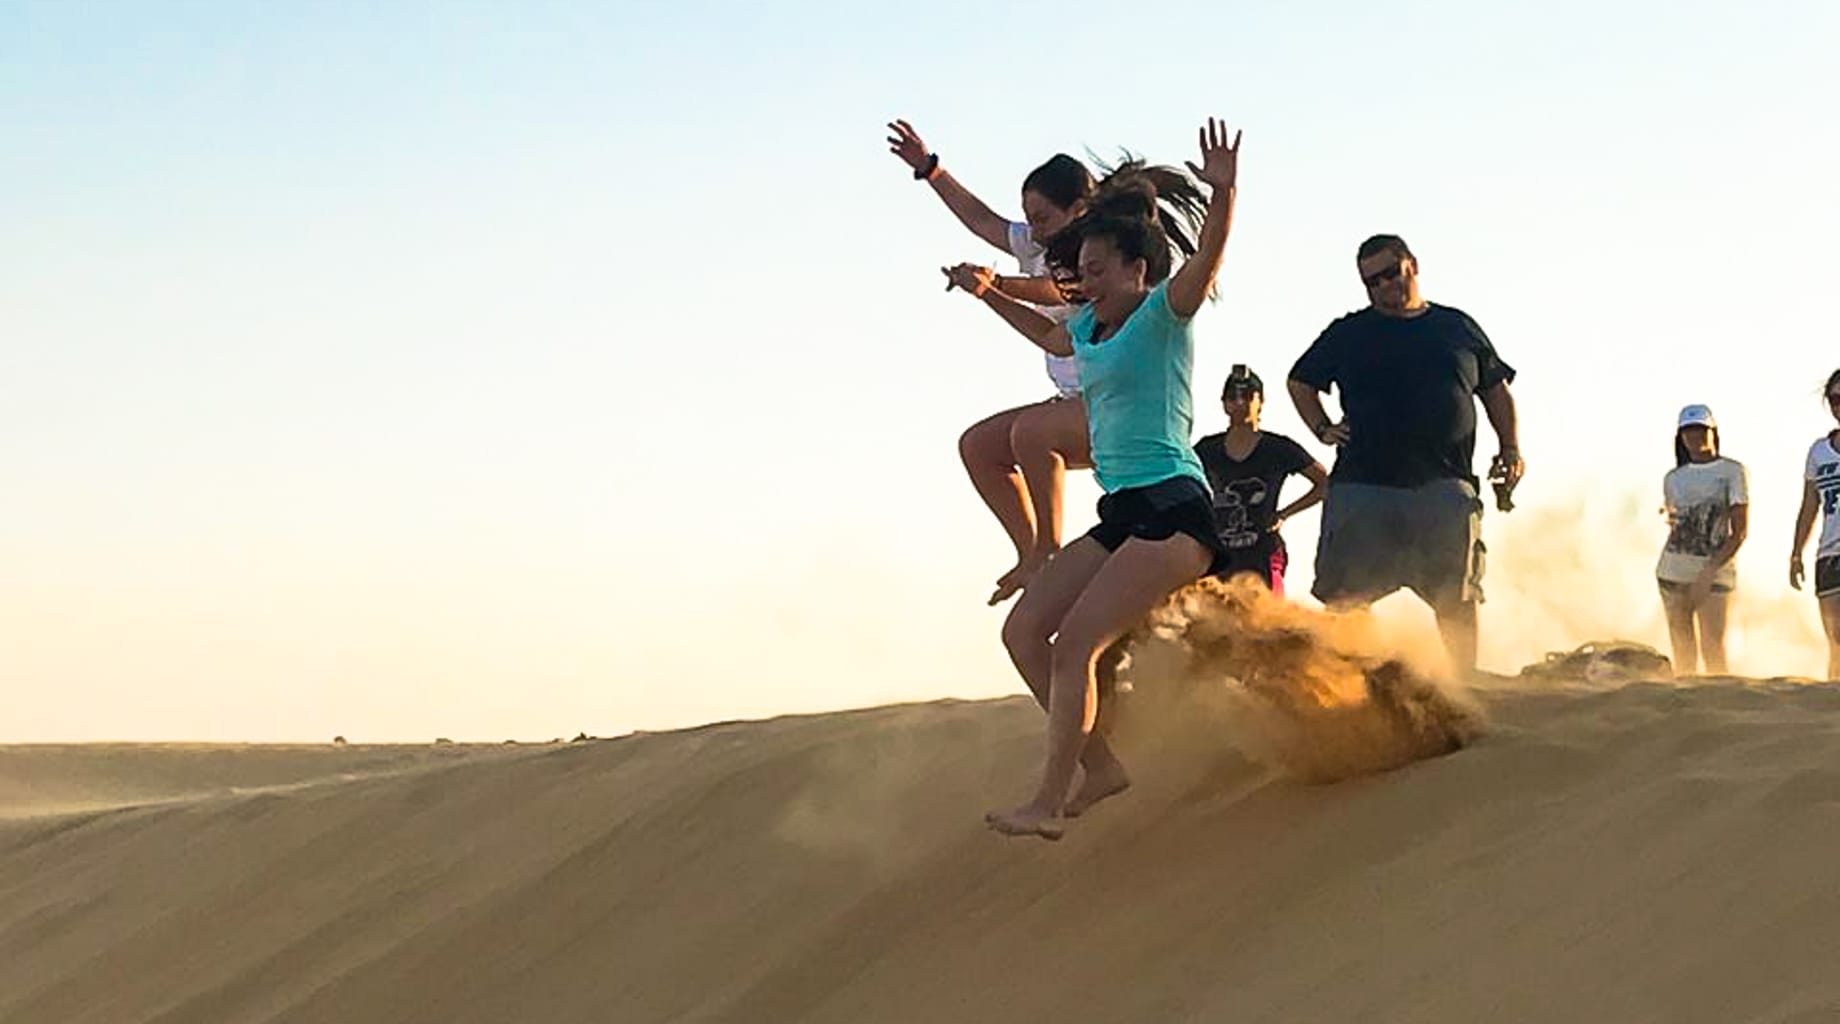 Jumping off sand dunes in Israel